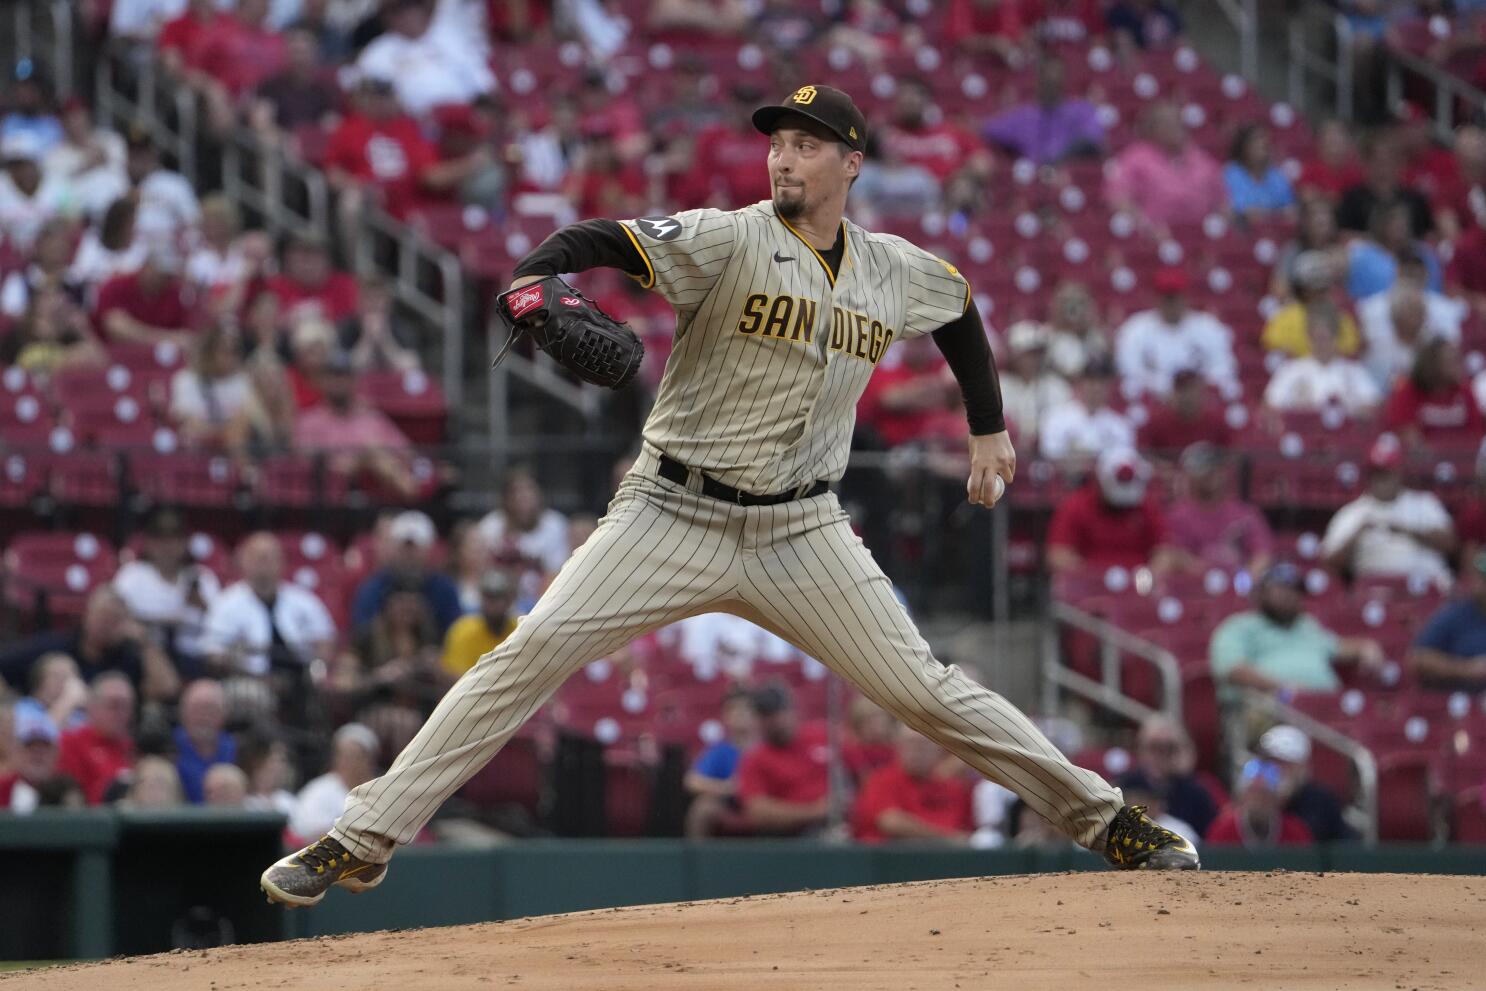 Padres roster review: Blake Snell - The San Diego Union-Tribune